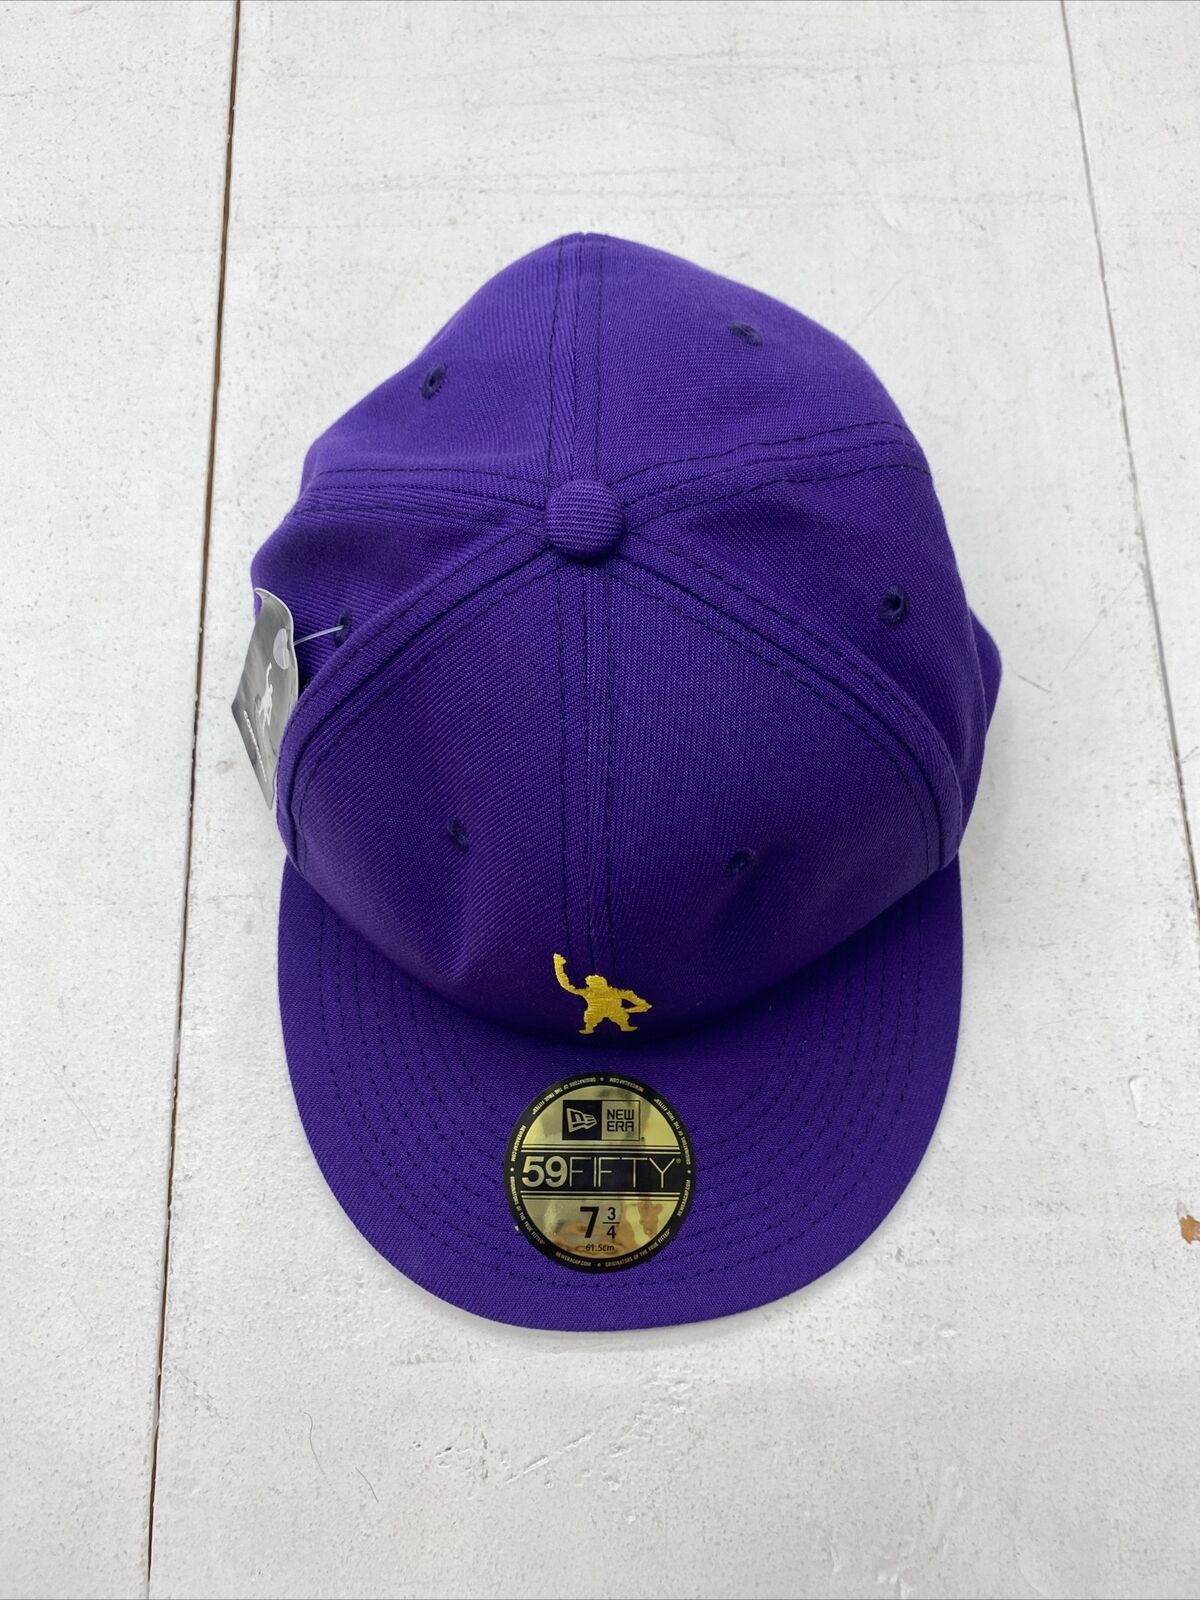 Los Angeles Lakers New Era 59Fifty Hat Cap Fitted Hat Size 7 3/4 New -  beyond exchange